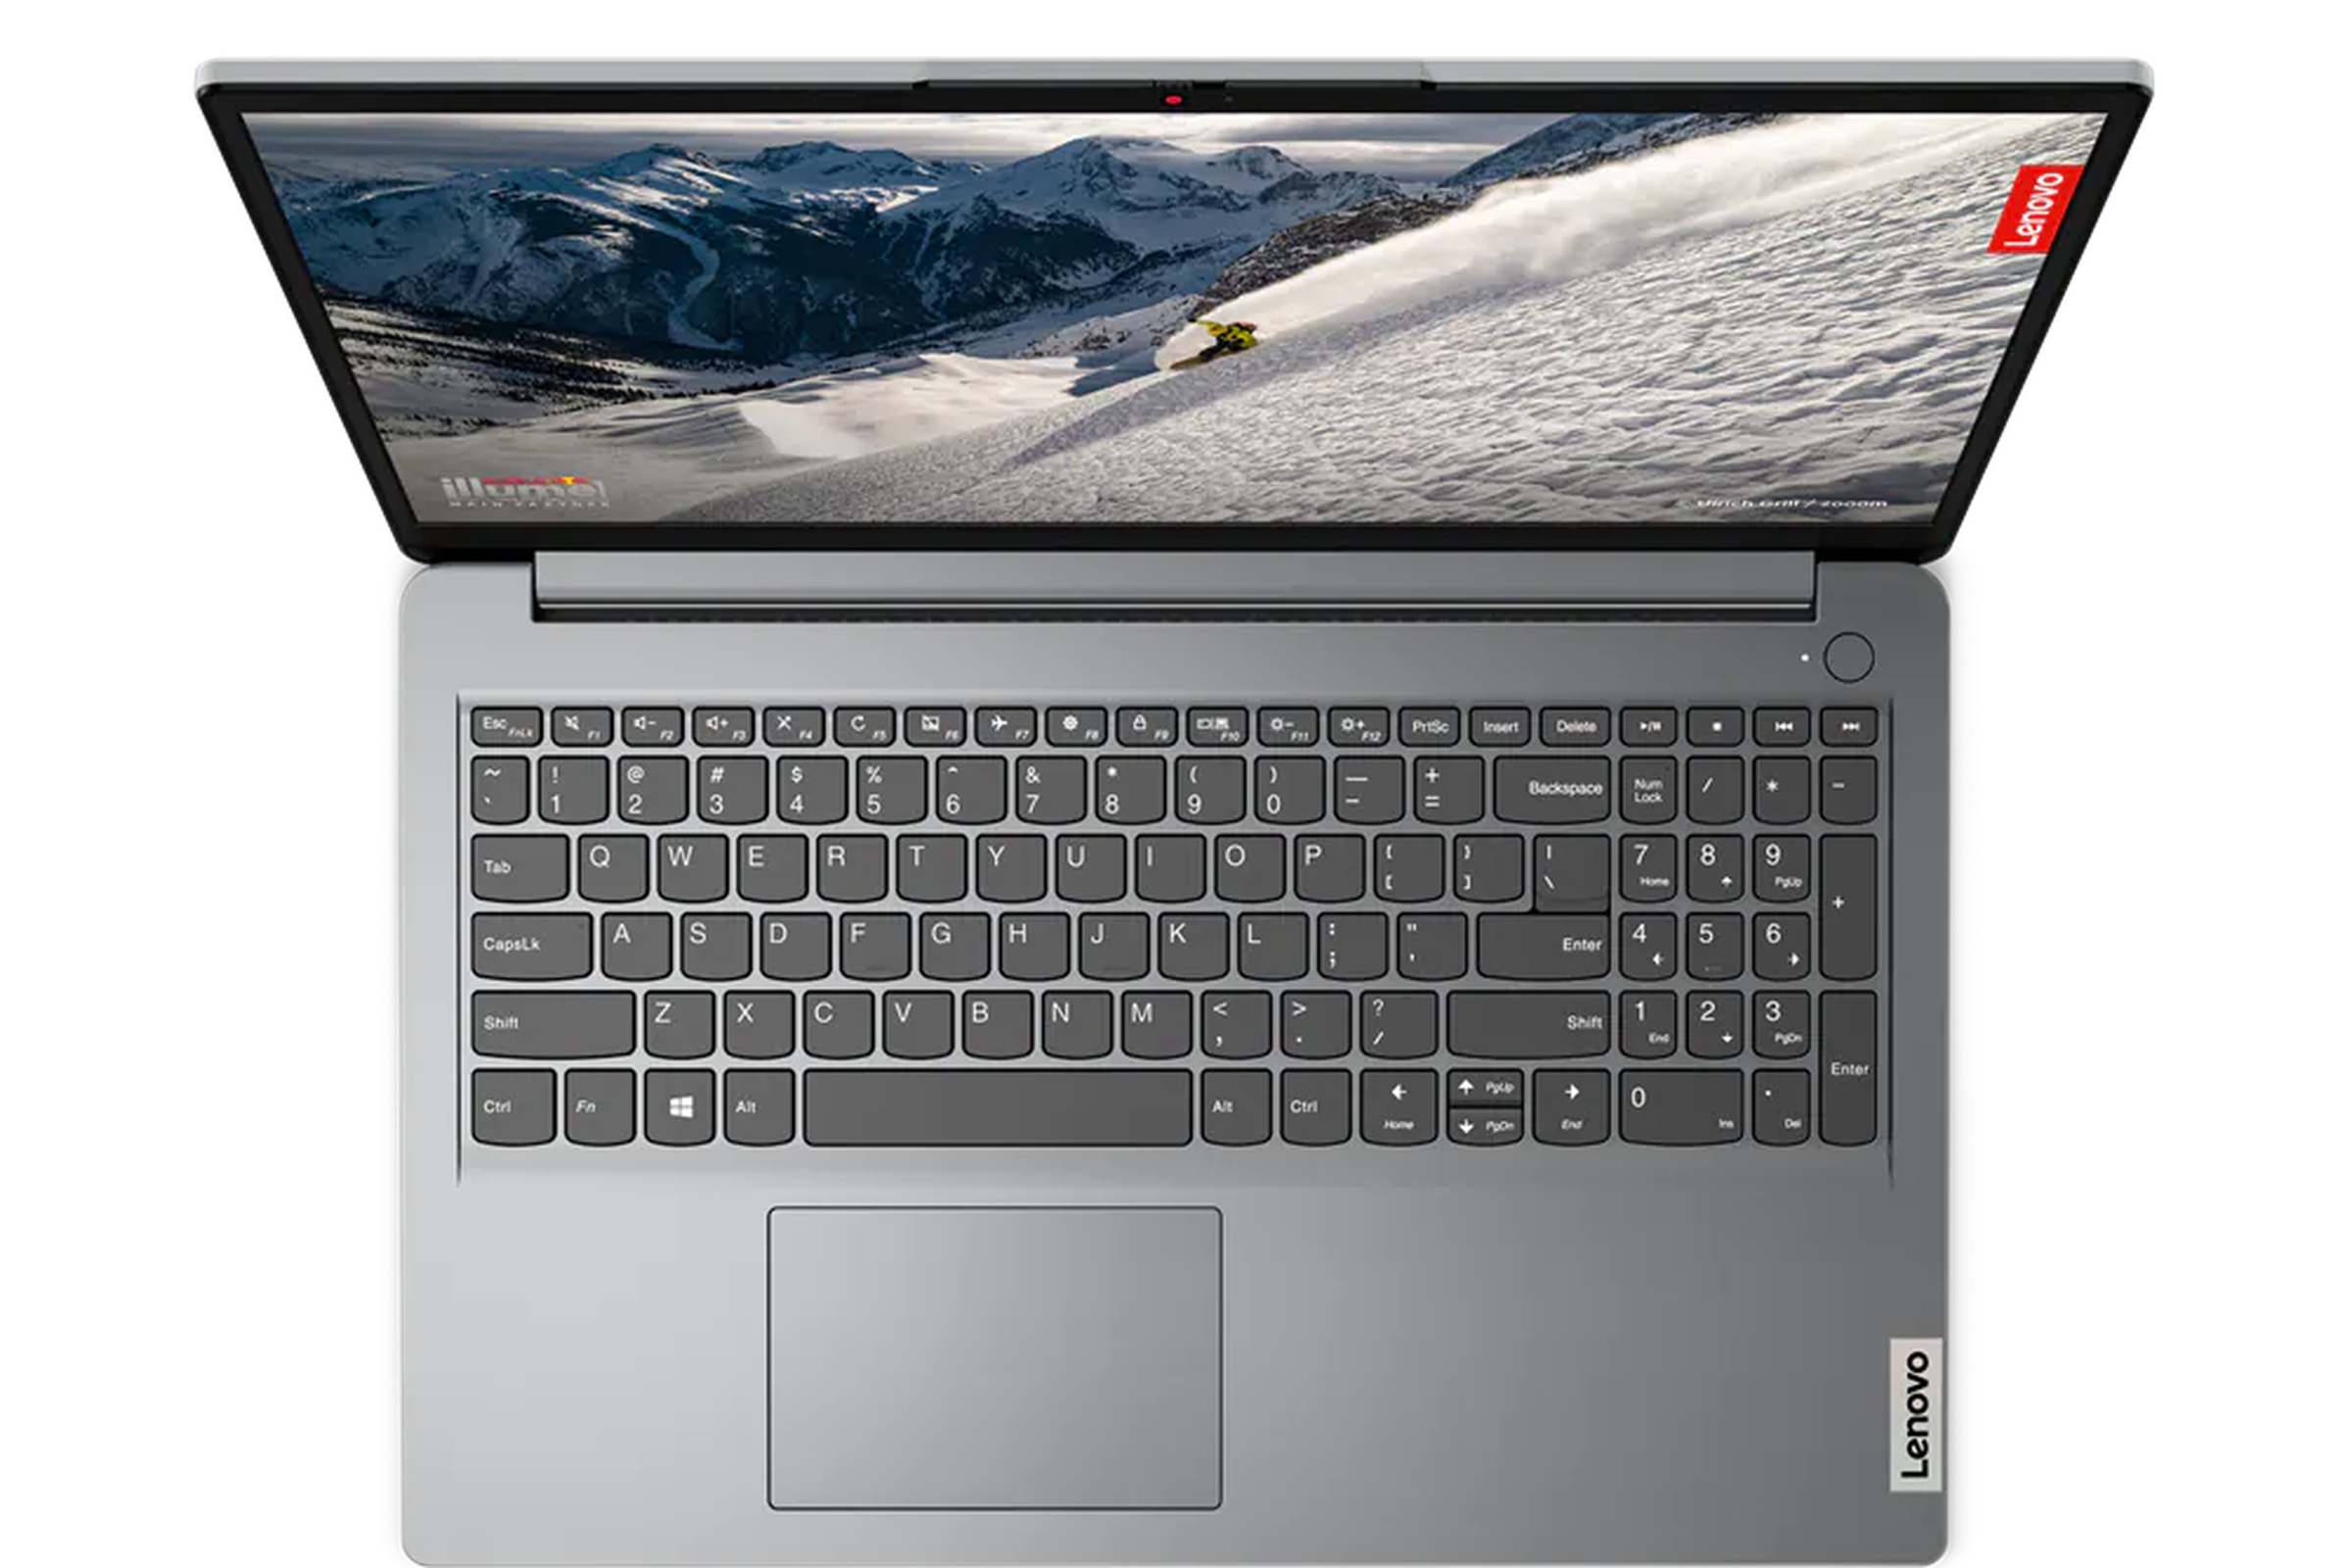 The IdeaPad 1 open, seen from above on a white background.